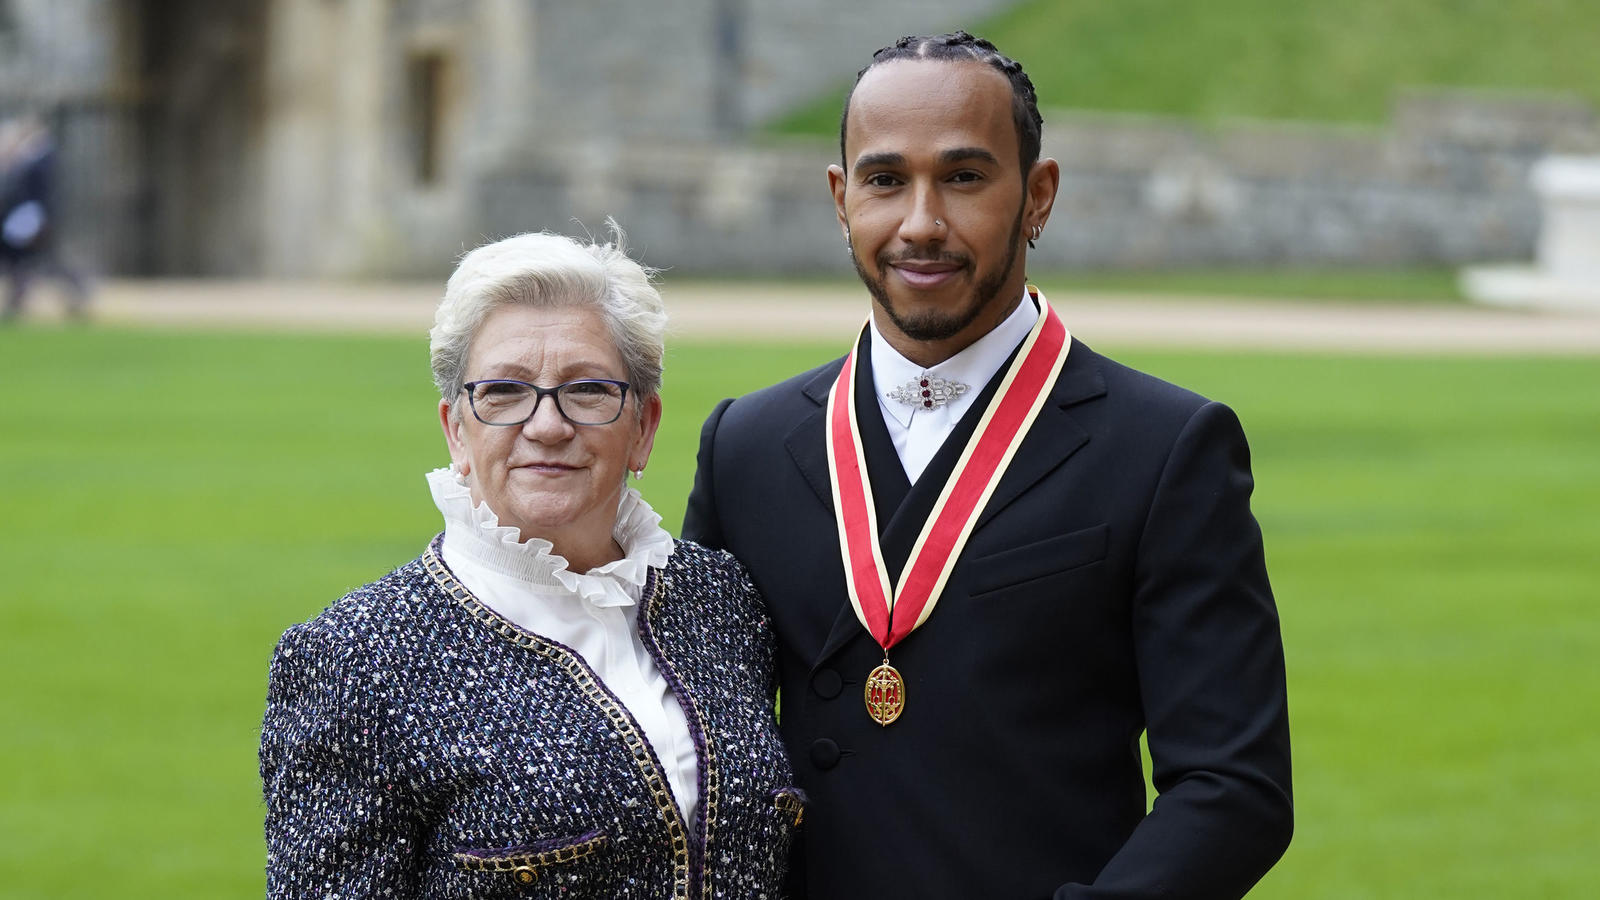 Lewis Hamilton with his mother Carmen Lockhart poses for the media after he was made a Knight Bachelor by Britain's Prince Charles during a investiture ceremony at Windsor Castle in Windsor, England, Wednesday, Dec. 15, 2021.